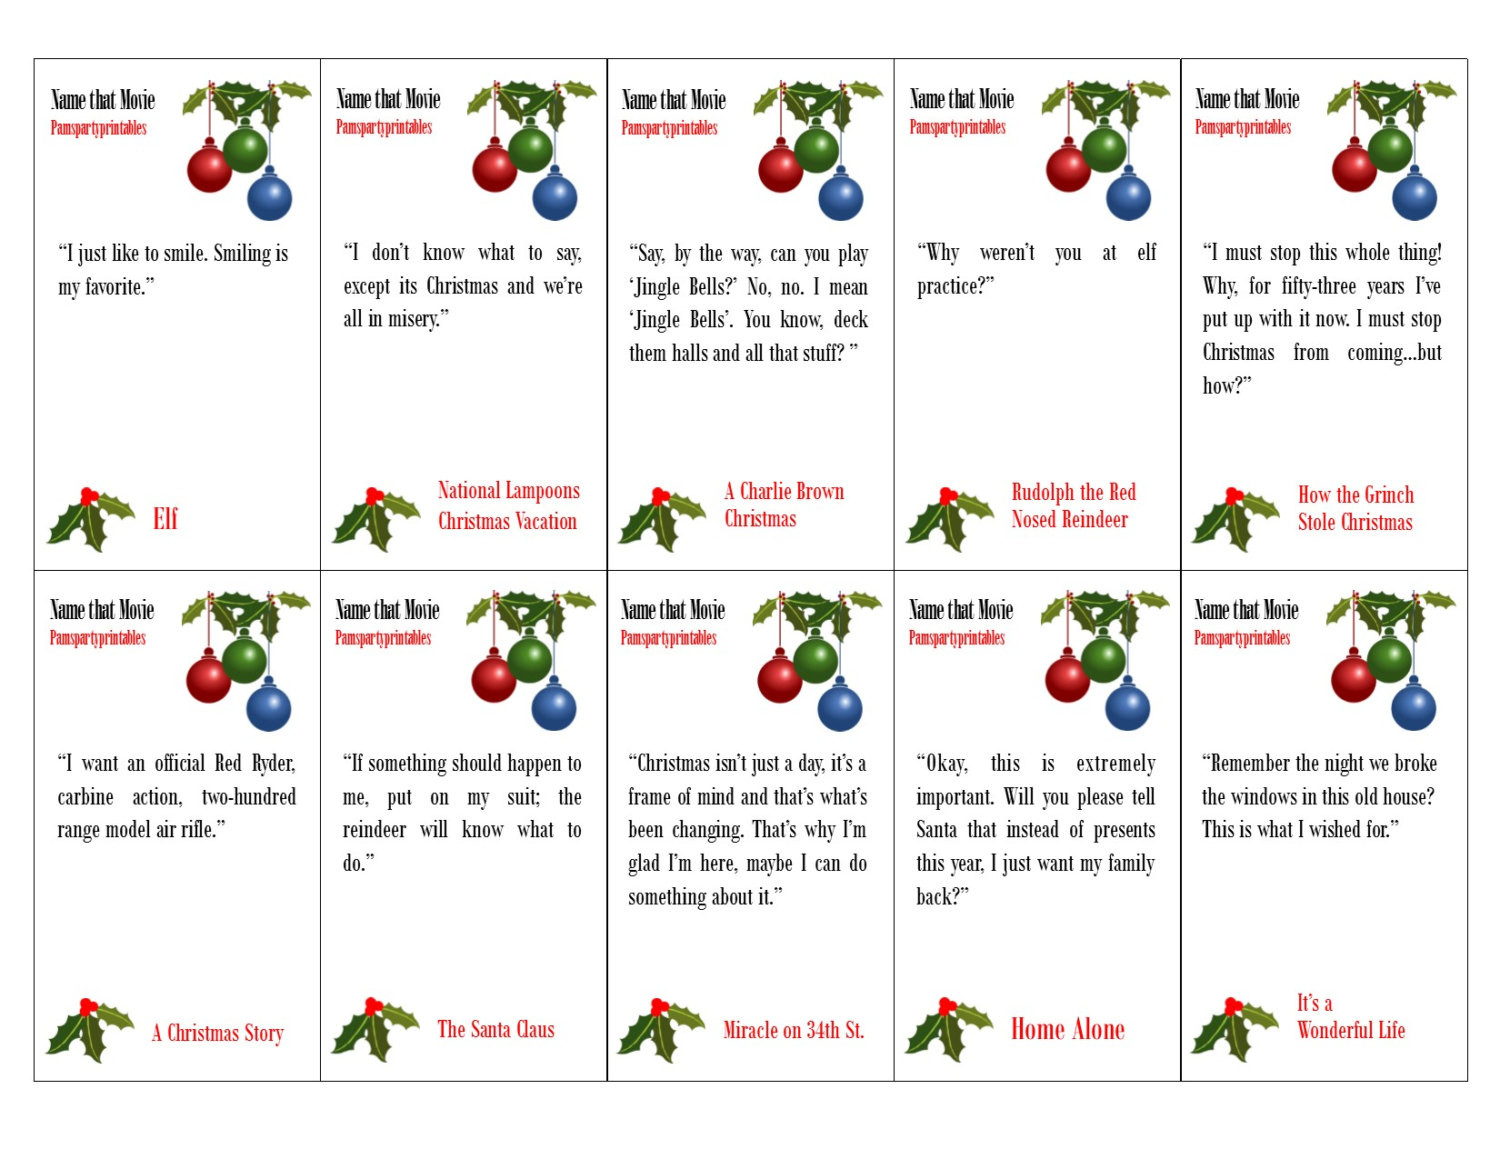 Christmas Movie Quotes Game
 Name that Christmas Movie Christmas Movie Quote Game